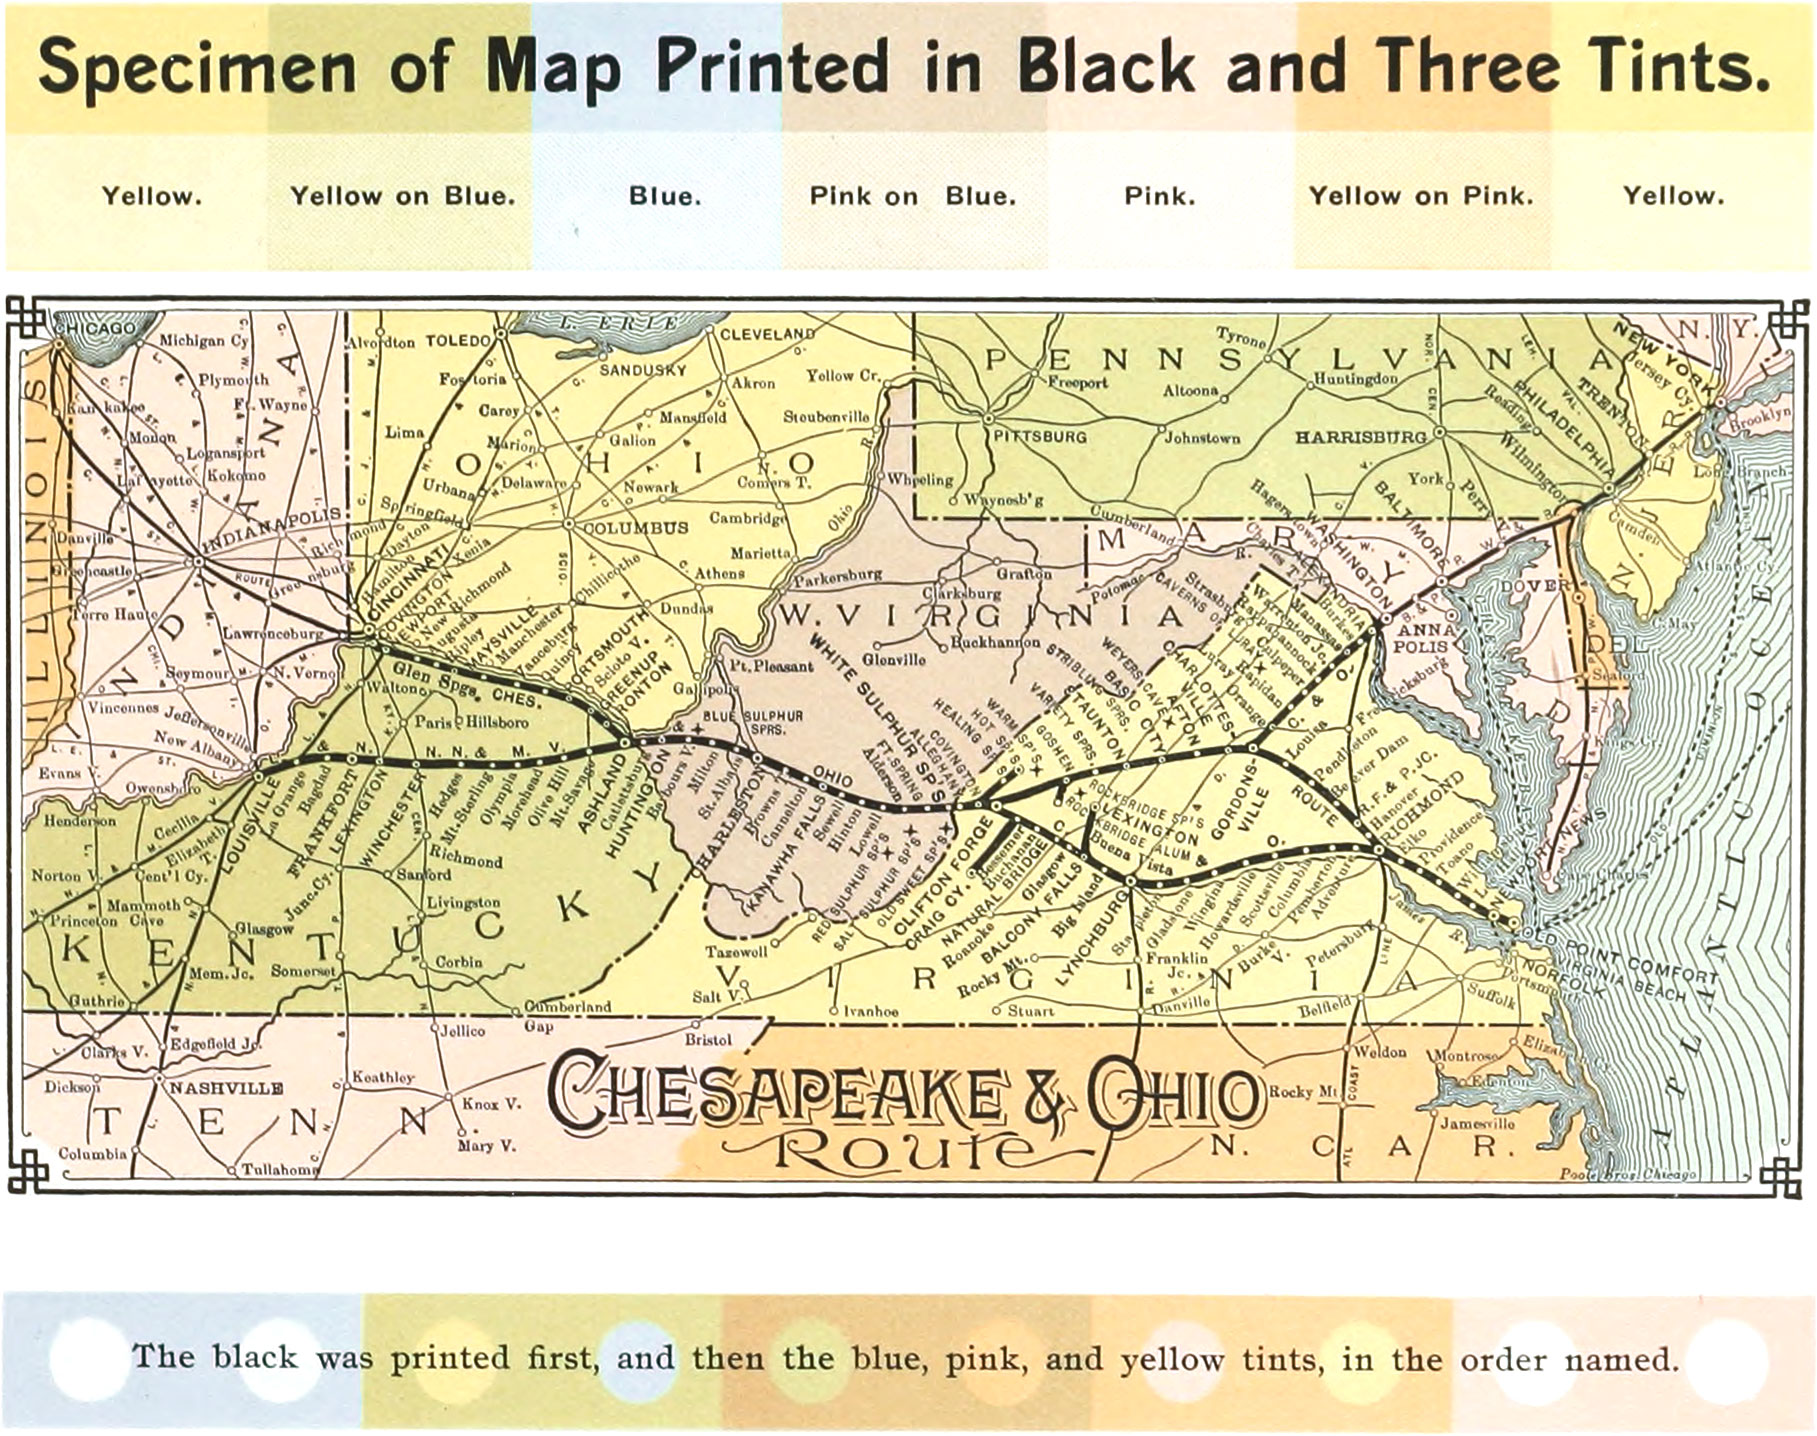 Specimen of a map of West Virginia and surrounding states printed in black and three tints